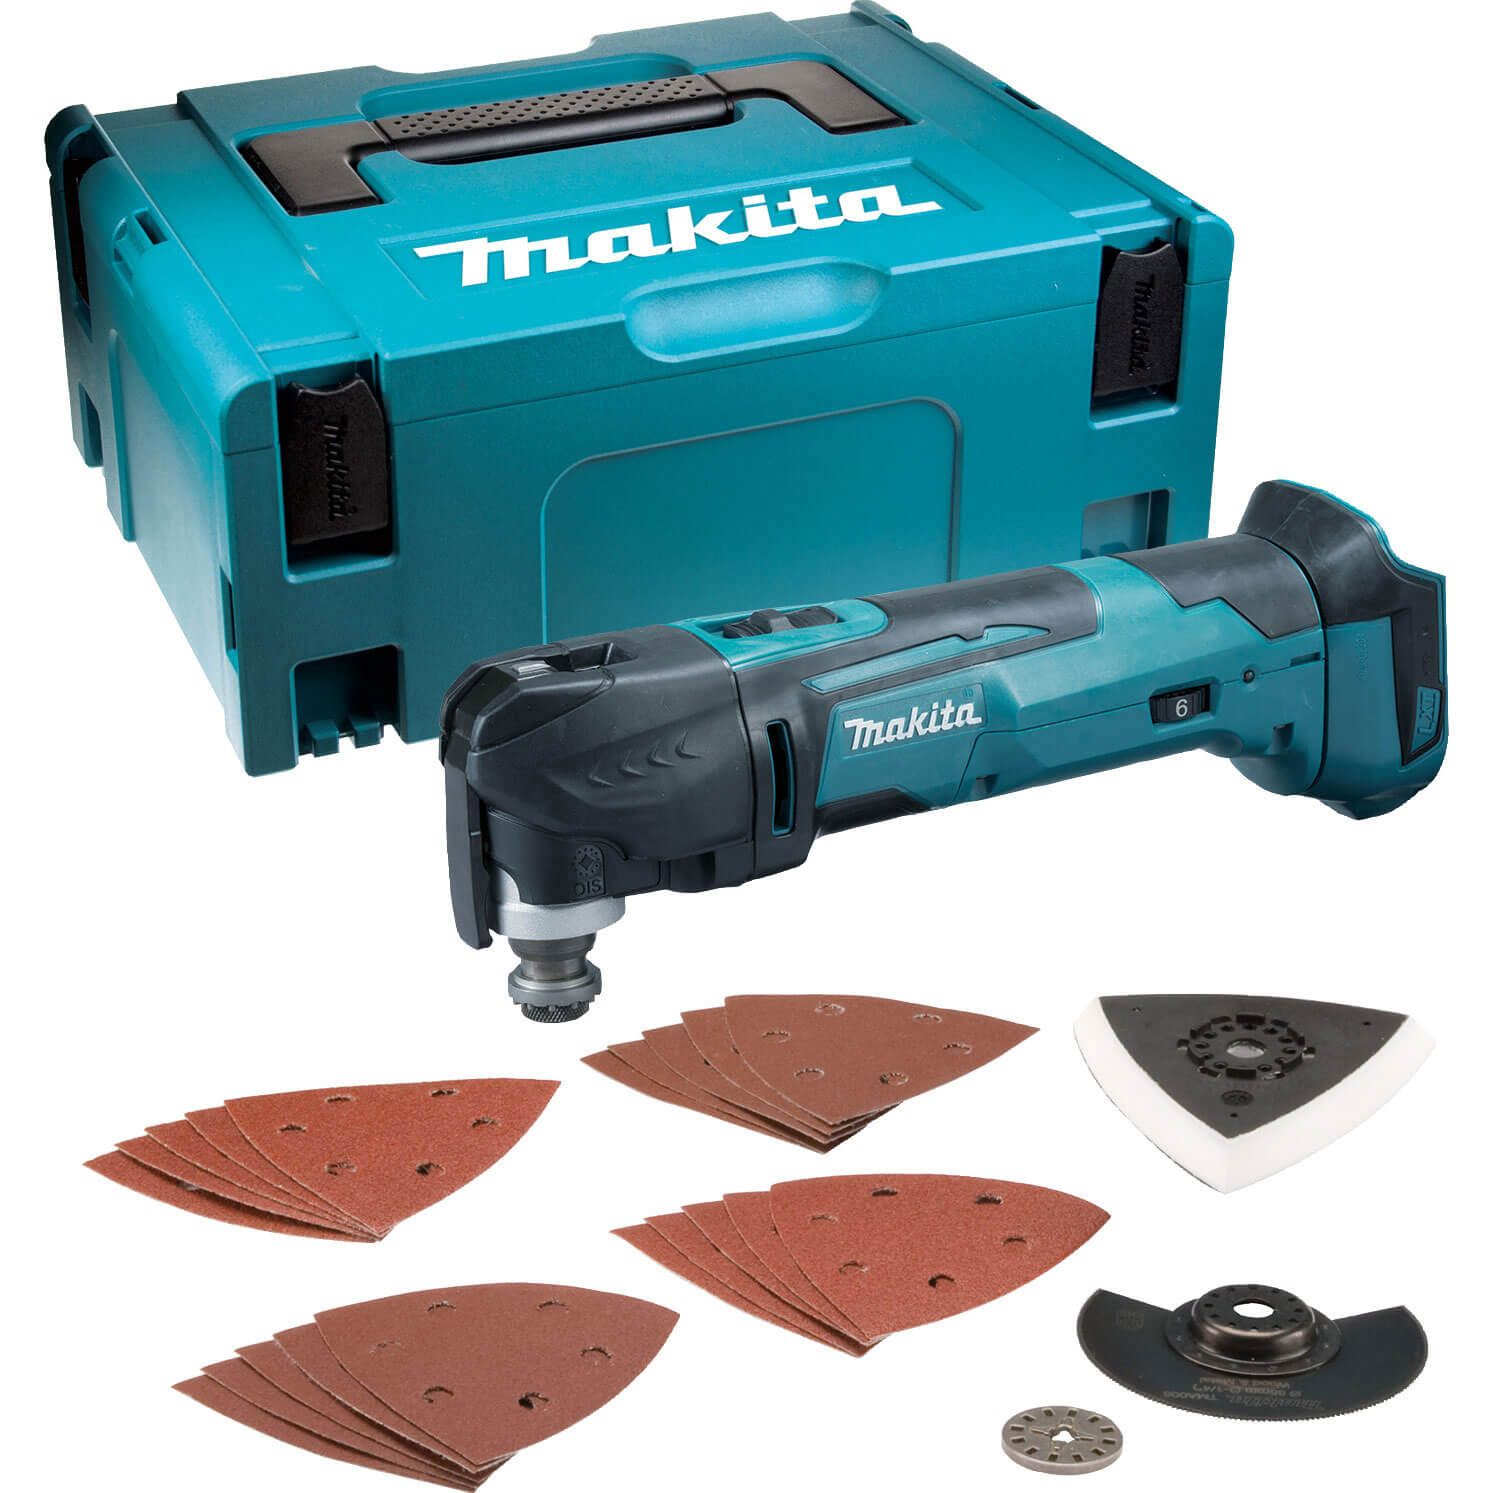 Makita DTM51 18v LXT Oscillating Multi Tool No Batteries No Charger Case & Accessories - Garden Equipment Review